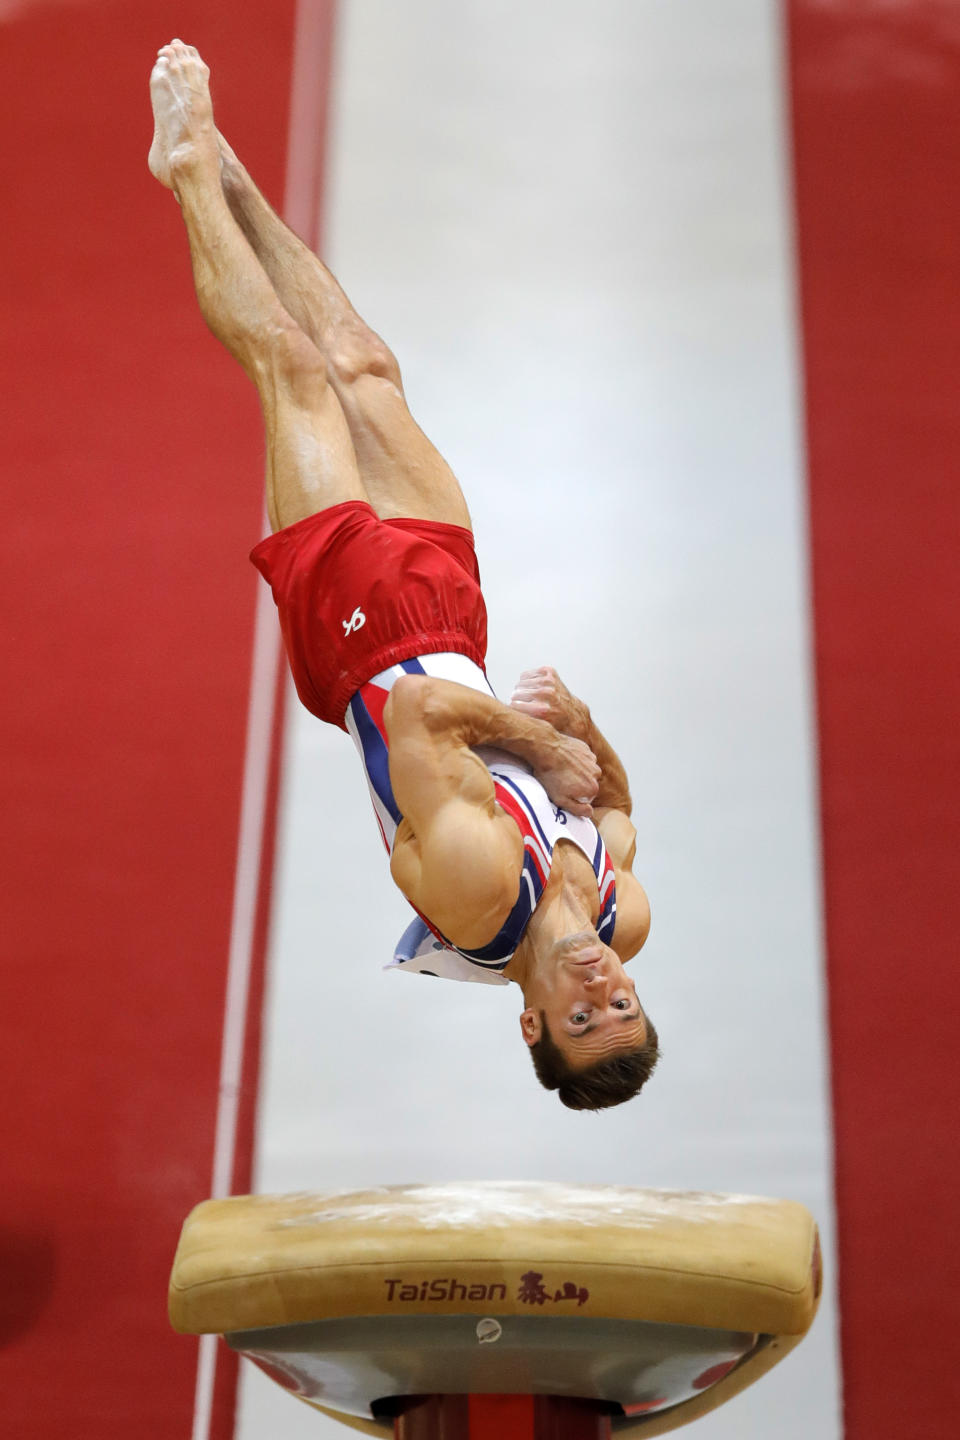 Samuel Mikulak of the U.S. performs on the vault during the Men's All-Around Final of the Gymnastics World Chamionships at the Aspire Dome in Doha, Qatar, Wednesday, Oct. 31, 2018. (AP Photo/Vadim Ghirda)